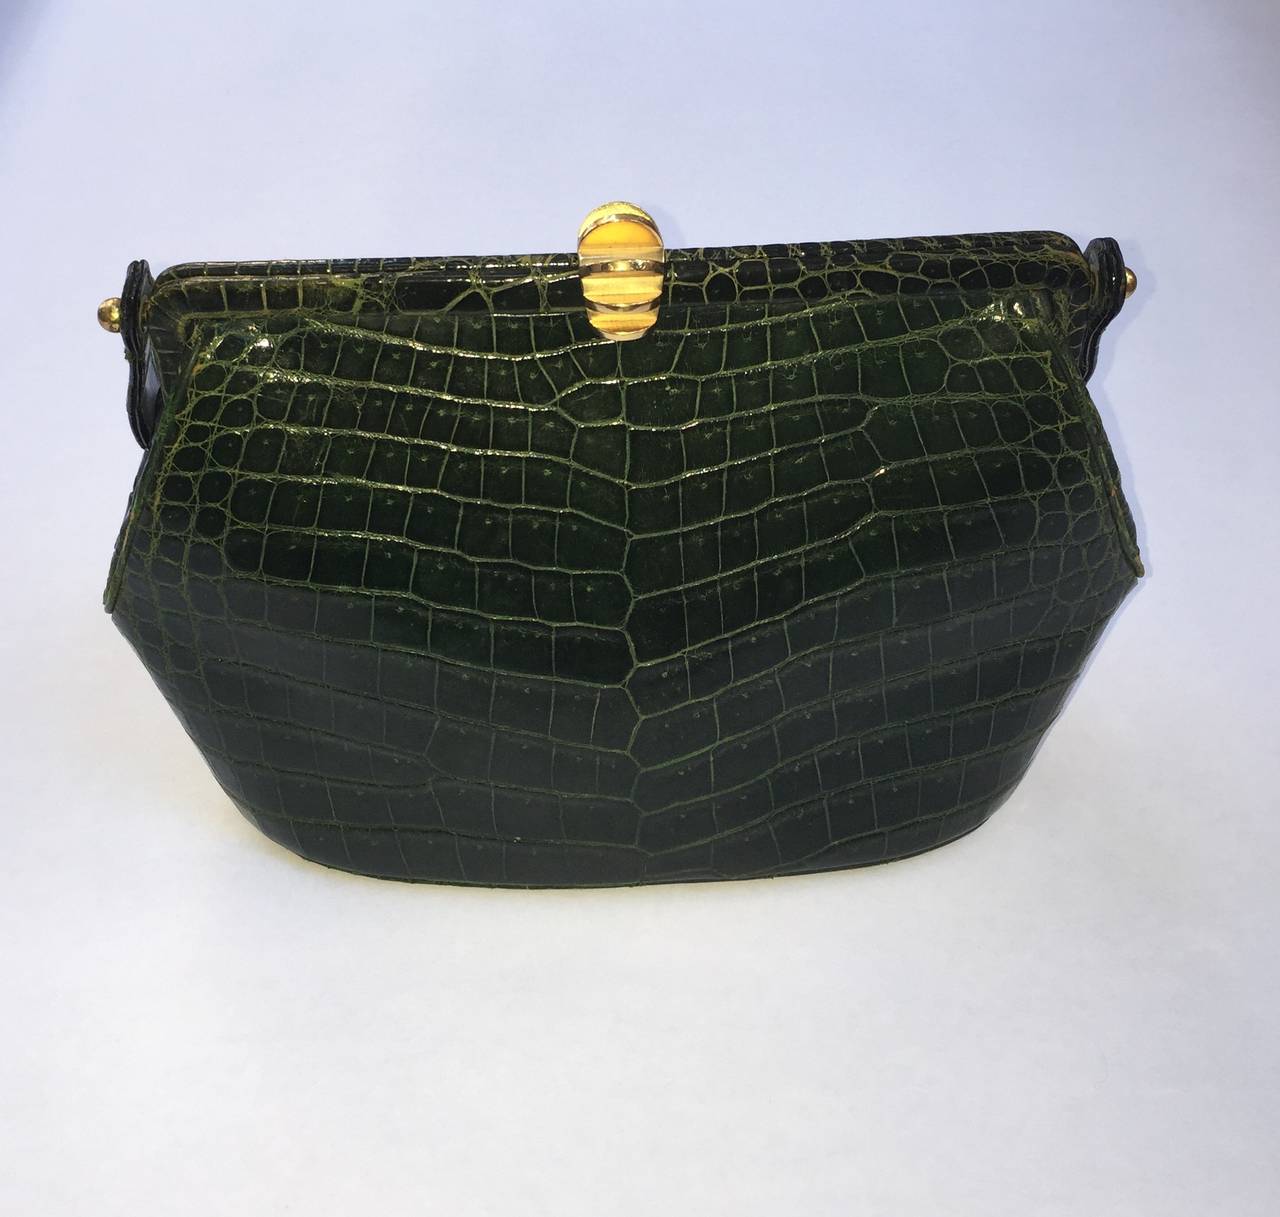 Coblentz 70s green crocodile handbag with strap and brass abstract clasp. The strap is in working condition but will soon need a new one but that is a minor repair on such a lovely and timeless handbag.  The measurements are:
10